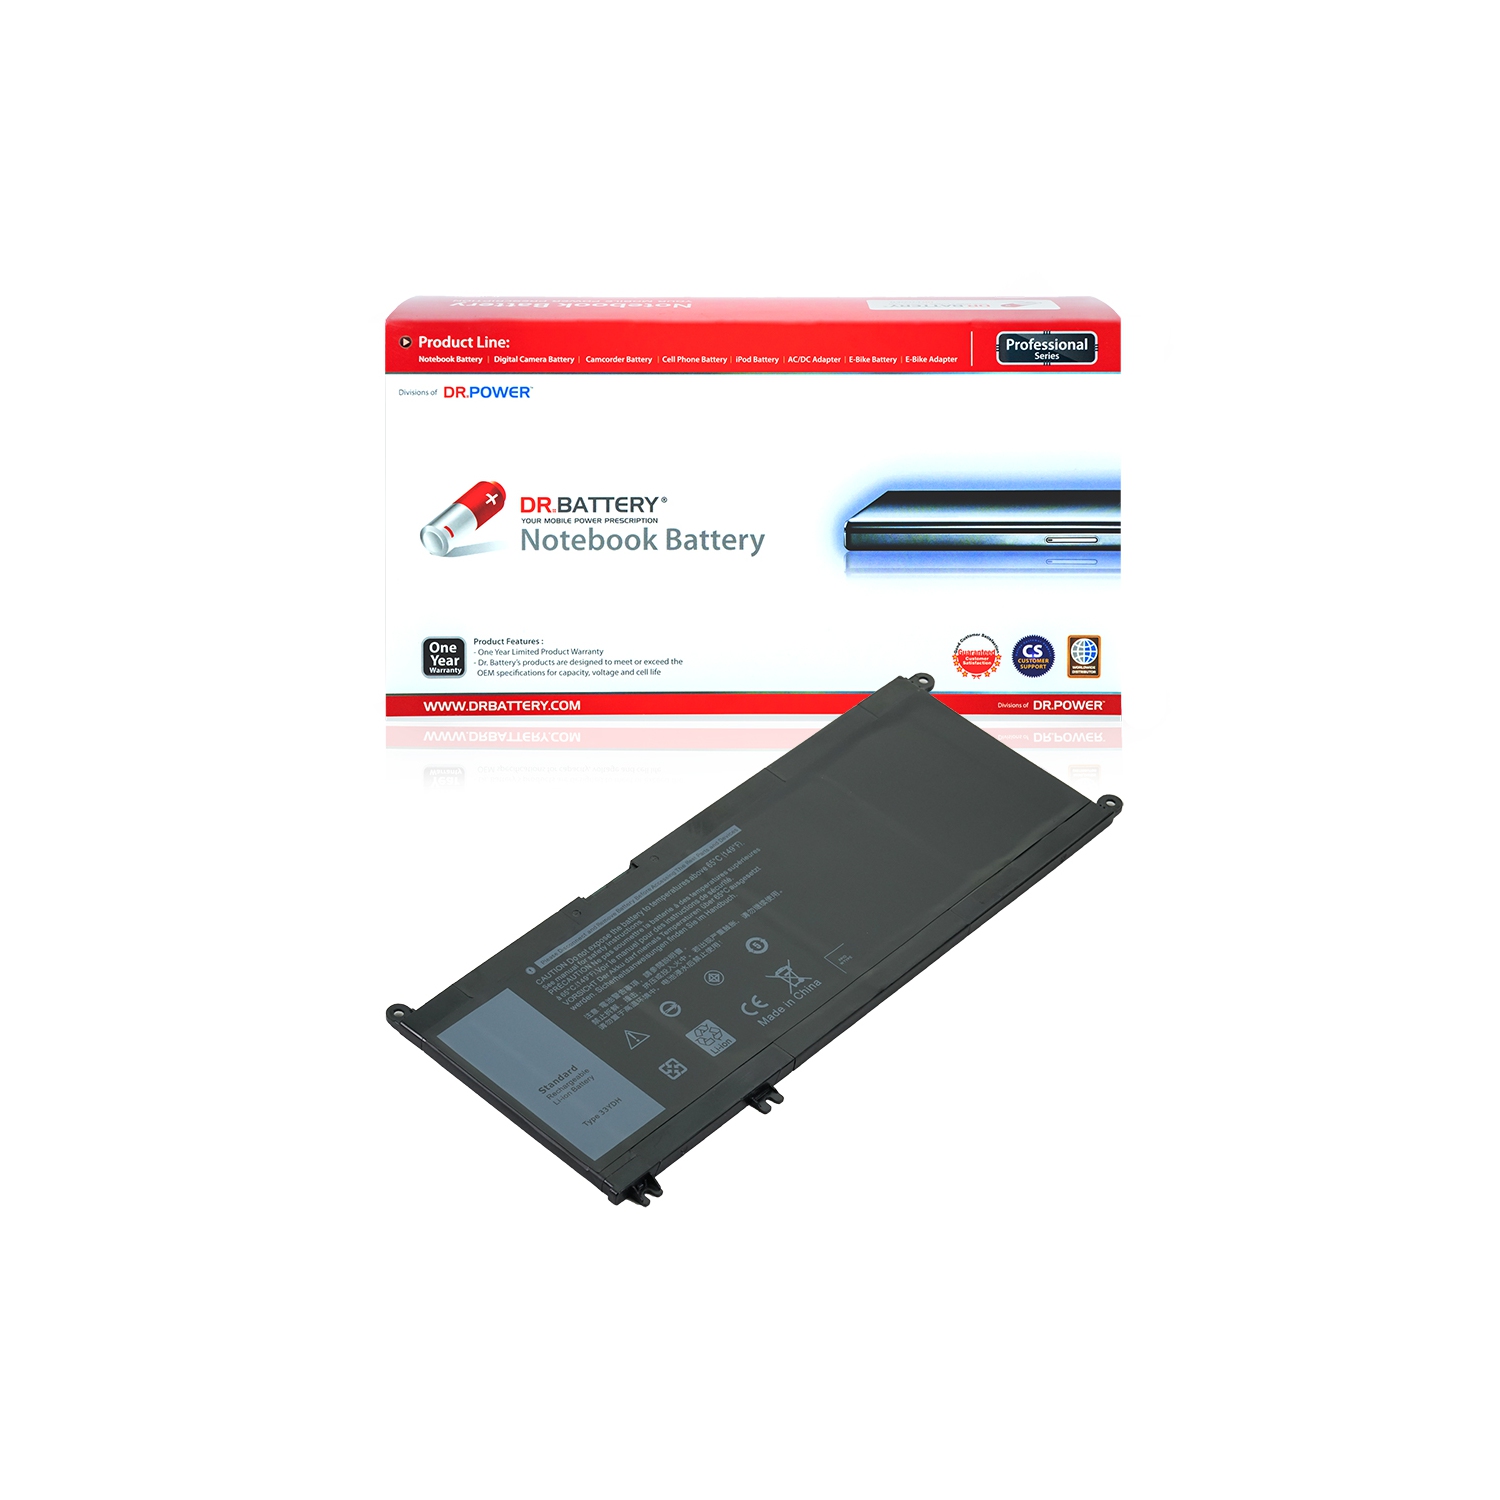 DR. BATTERY - Replacement for Dell G3 17 Inspiron 7778 / 3779 / G5 15 5587 / Inspiron 17 7773 / 81PF3 / PVHT1 / 081PF3